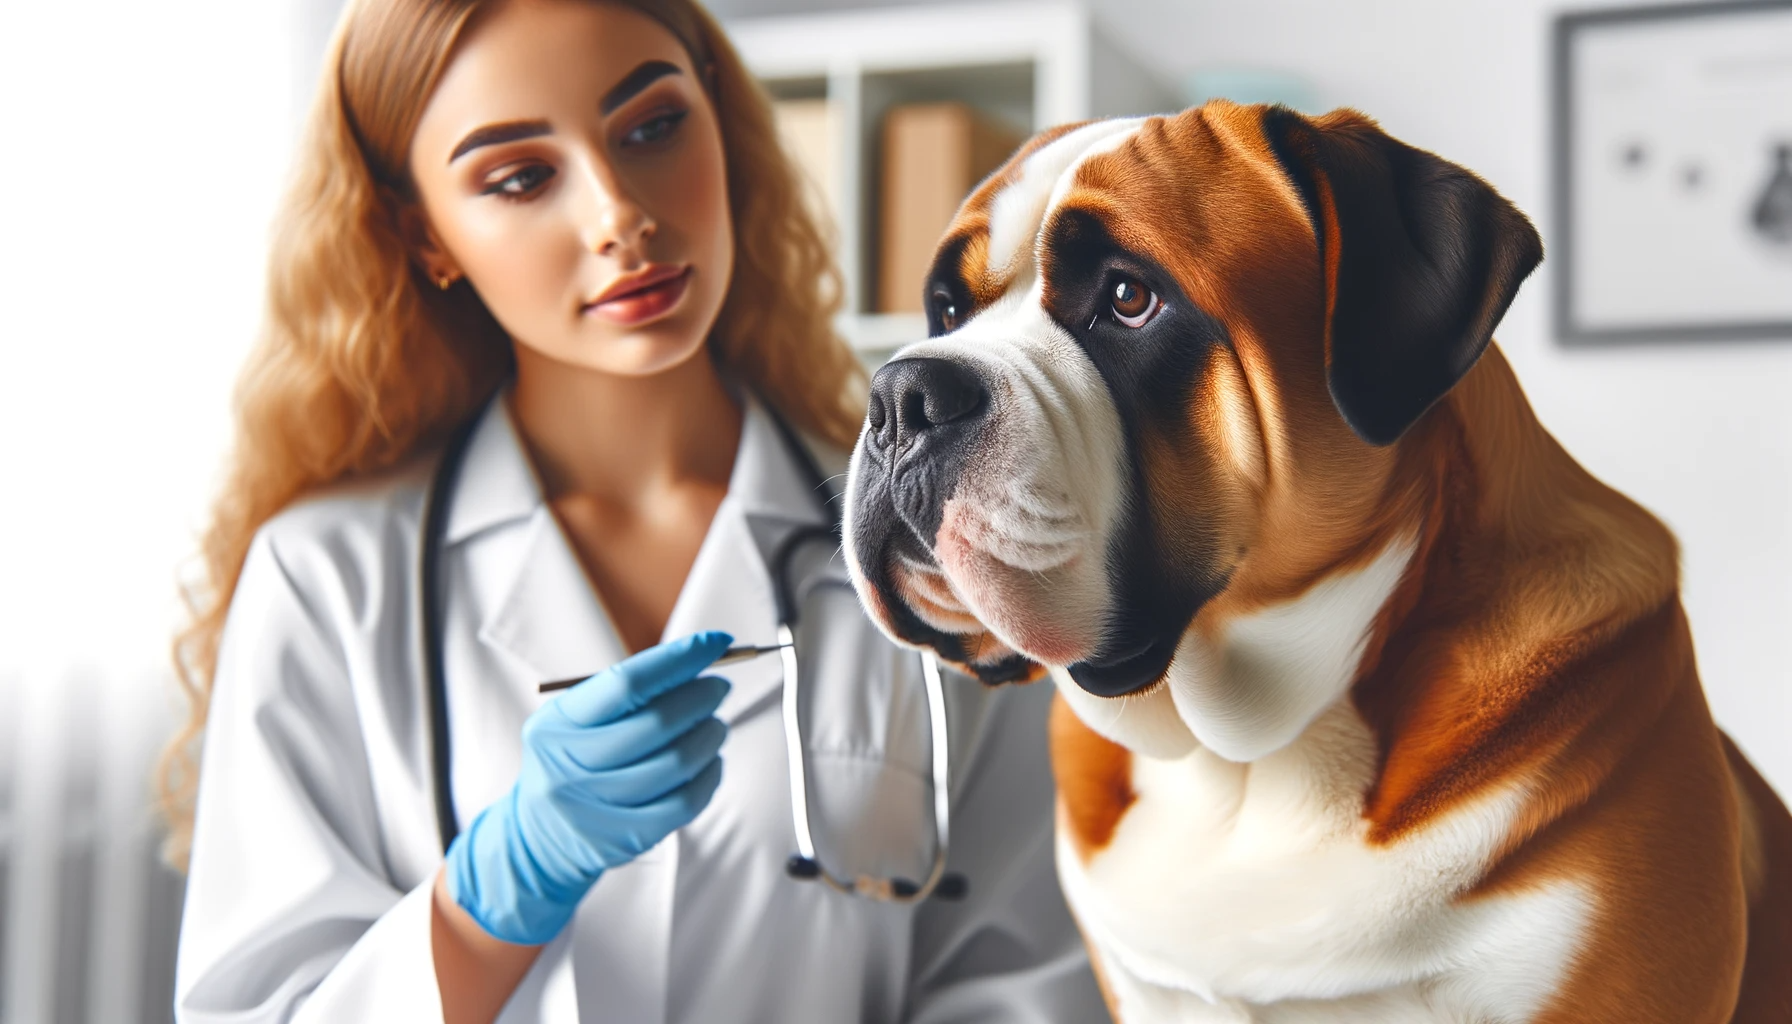 Photo of an attentive Bullador dog during a vet visit. The dog listens closely to a female veterinarian, who speaks to it. The scene highlights the importance of regular veterinary care for pets.